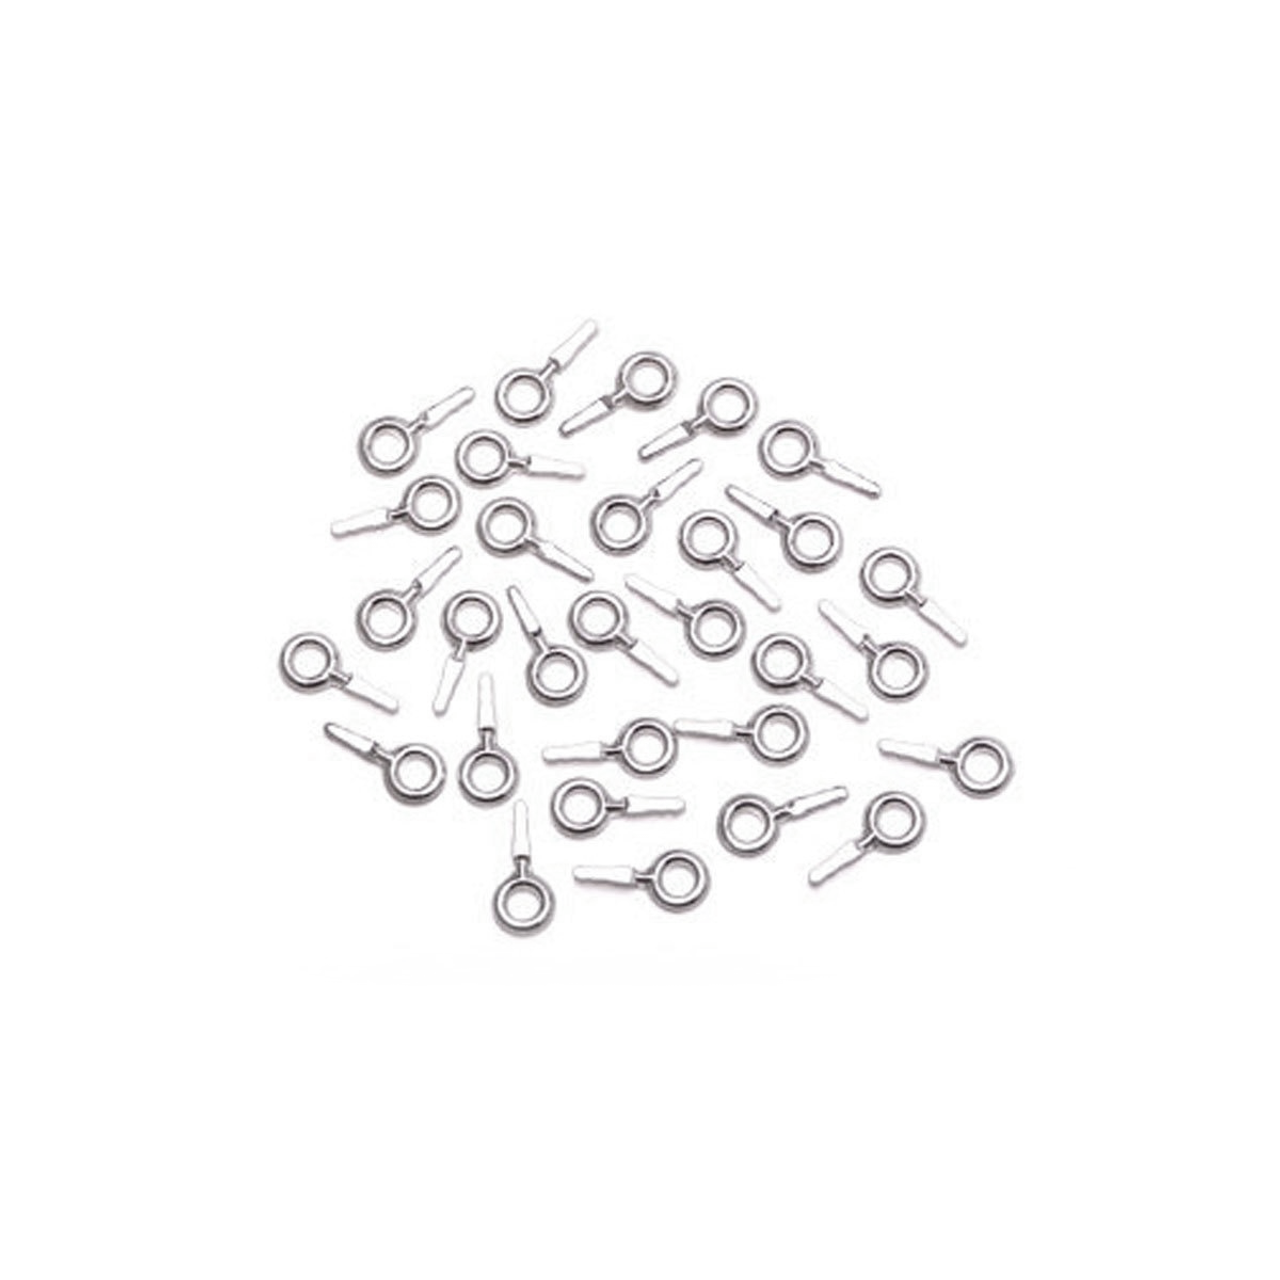 Embeddable Eyelet/Jump Ring - Fine Silver - 3mm - Pack of 30